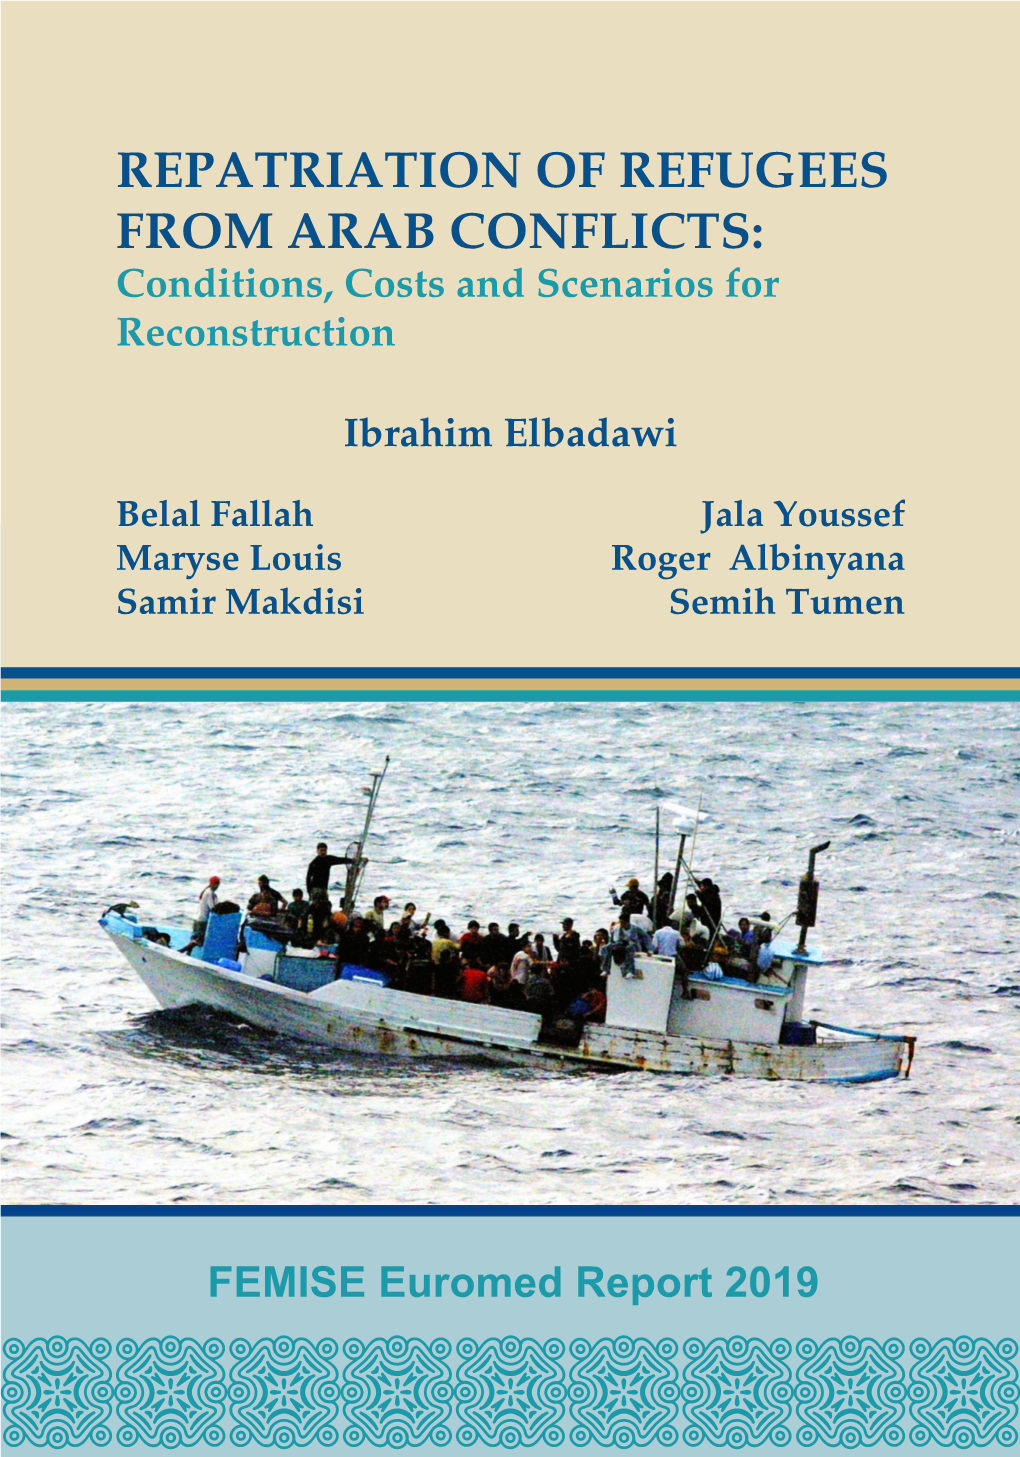 REPATRIATION of REFUGEES from ARAB CONFLICTS: Conditions, Costs and Scenarios for Reconstruction